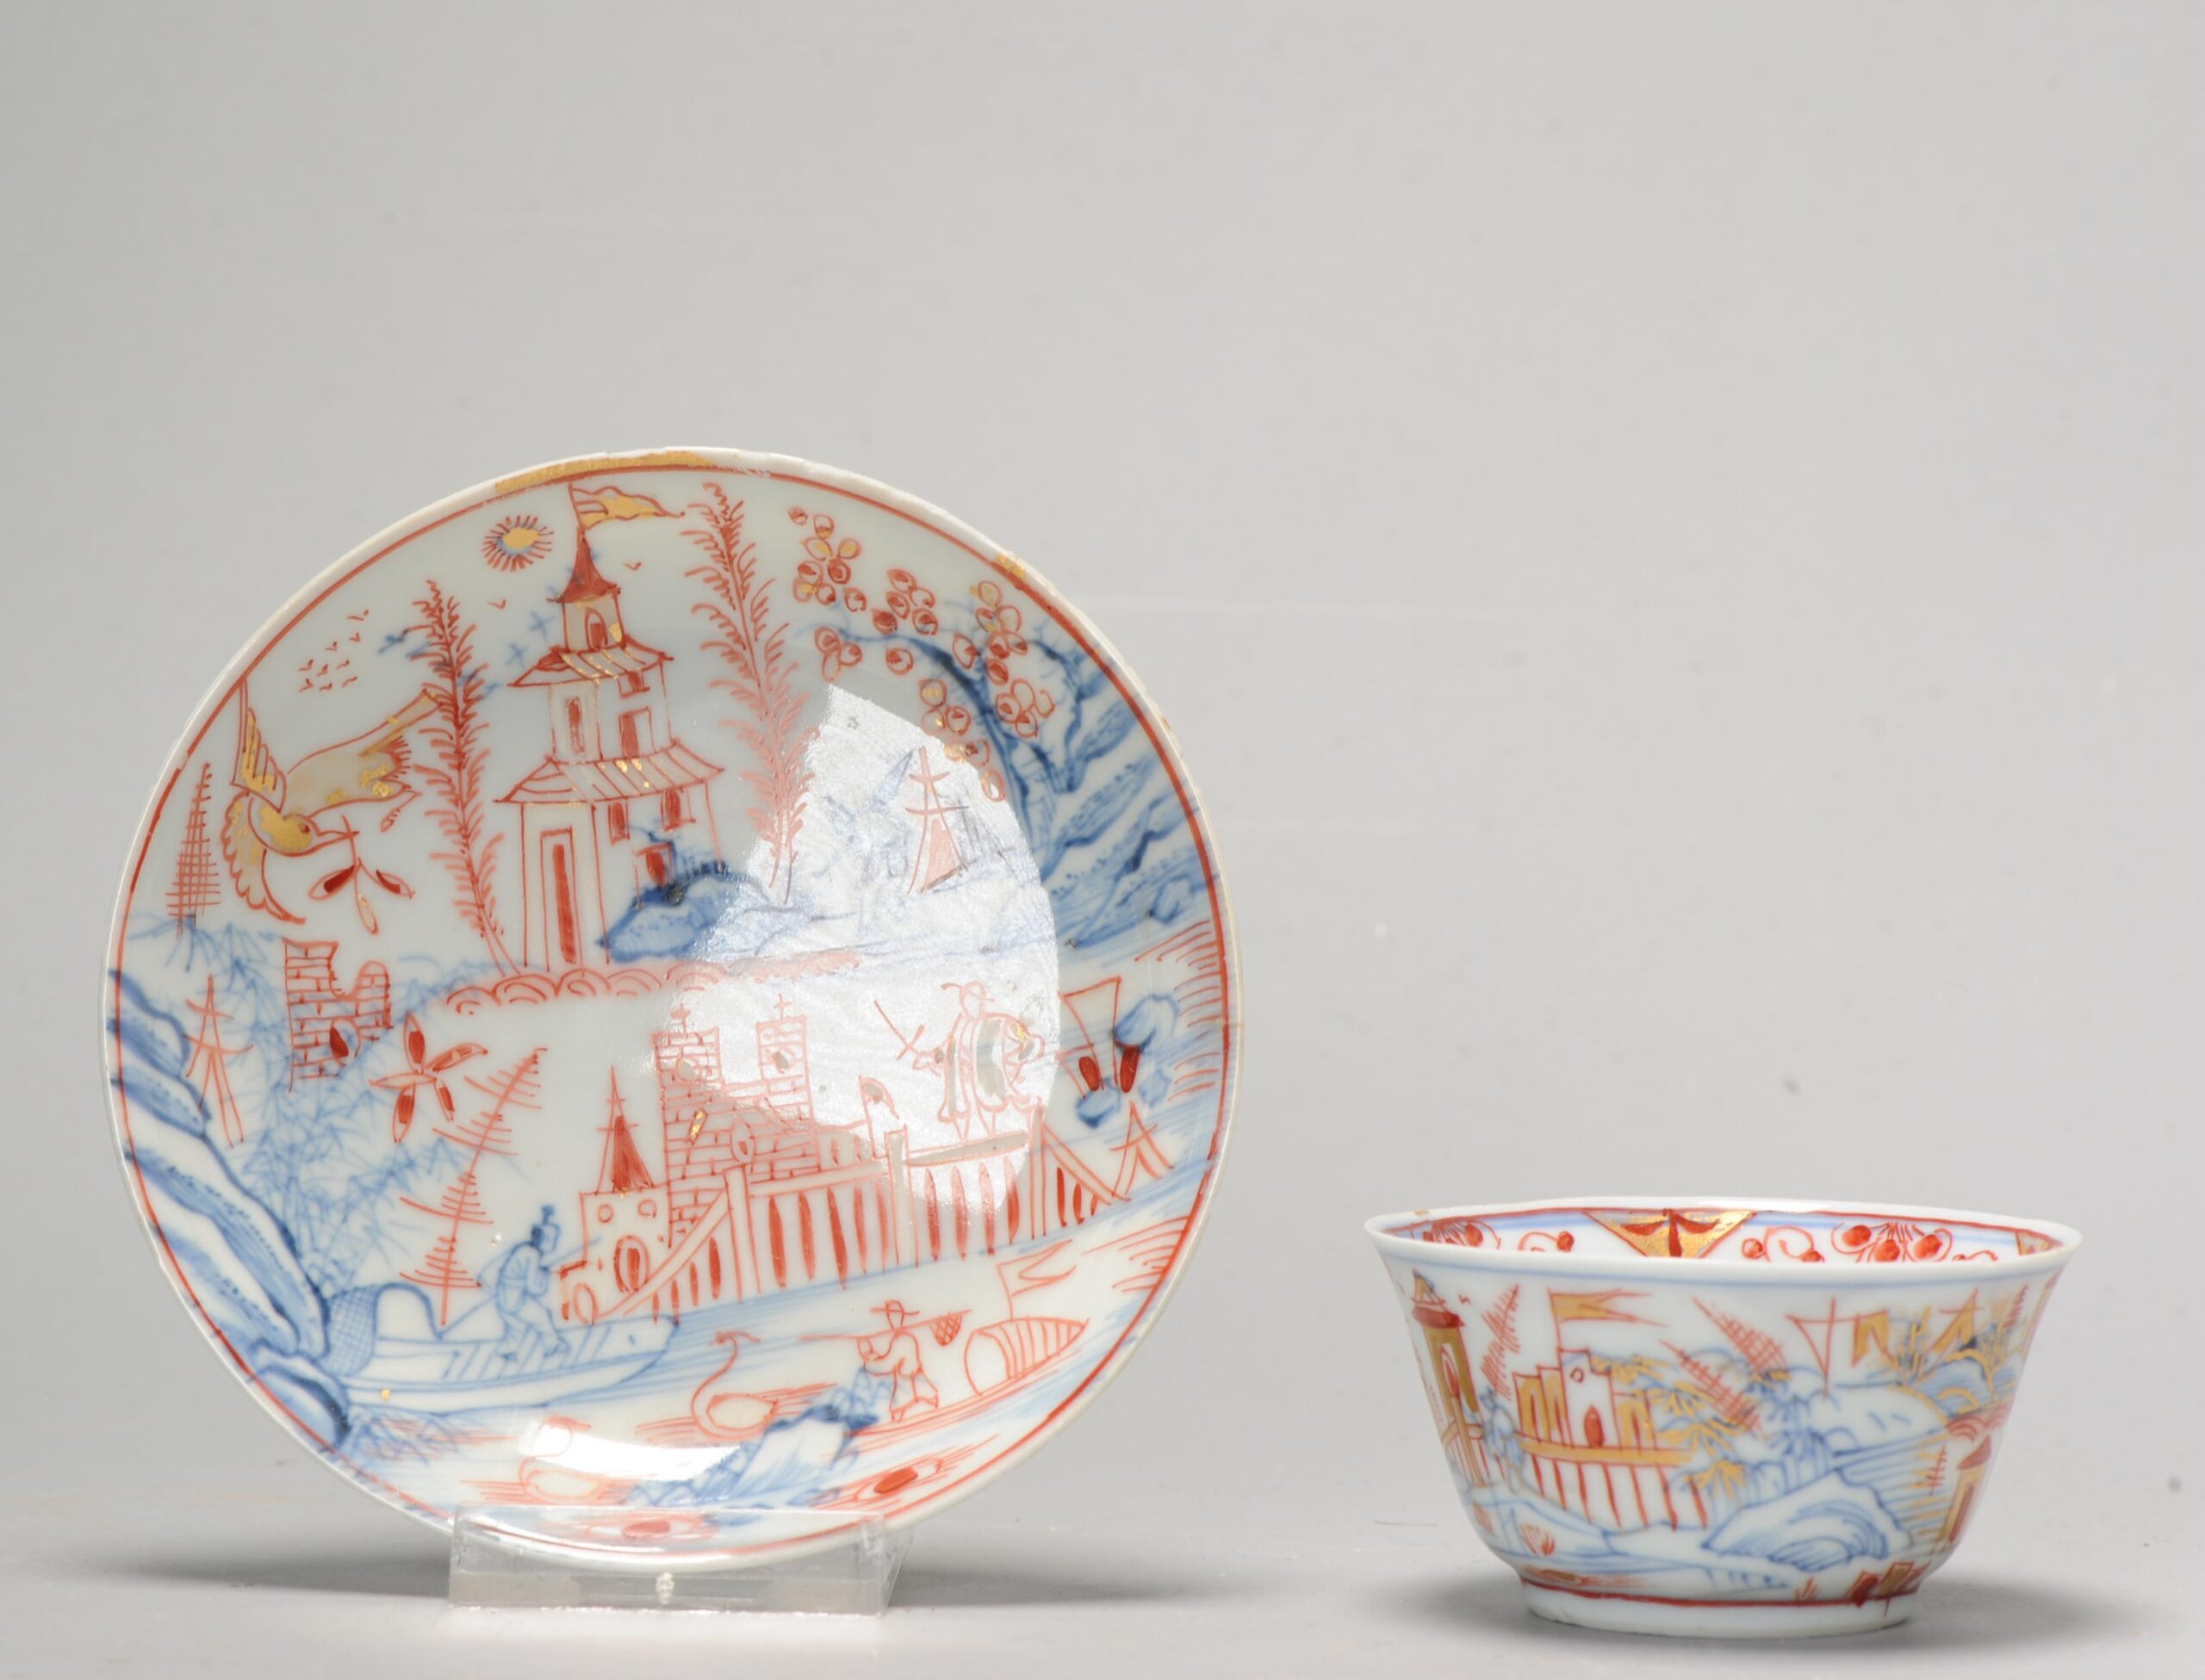 1096 A Lovely Tea Bowl and Saucer. Painted in Europe on a Chinese blue and white. London Bont